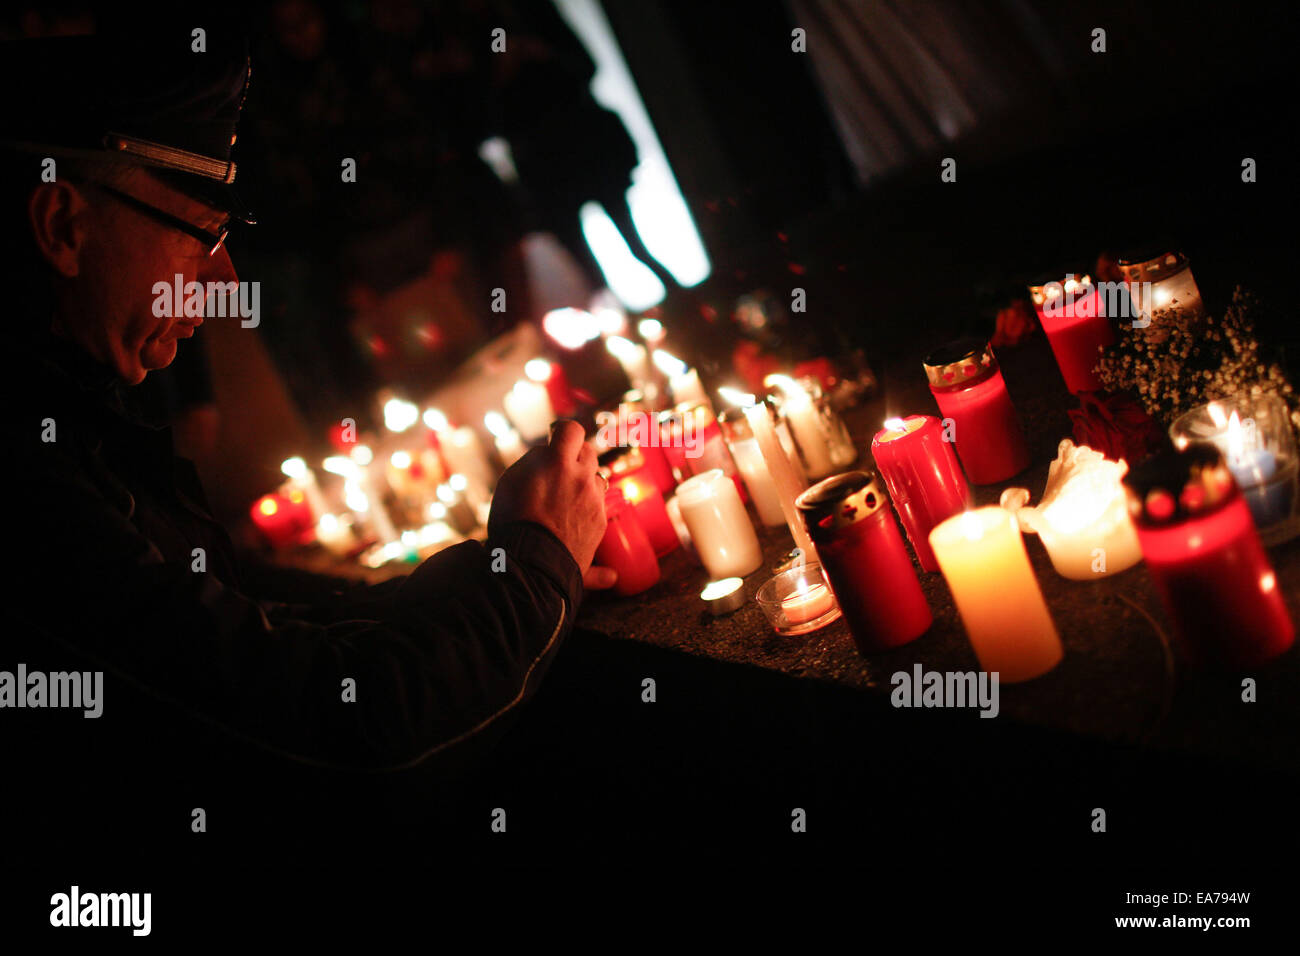 Berlin, Germany. 7th Nov, 2014. A policeman lights a candle during a memorial activity for the Crystal Night at Berlin's Grunewald train station in Berlin, Germany, on Nov. 7, 2014. Some 100 middle school students and students from the local police school took part in the memorial activity on Friday to commemorate the 76th anniversary of the Nazi's 'Kristallnacht' (Crystal Night, Night of Broken Glass) in 1938, at Berlin's Grunewald train station, one of the major sites of deportation of the Berlin Jews during World War II. Credit:  Zhang Fan/Xinhua/Alamy Live News Stock Photo